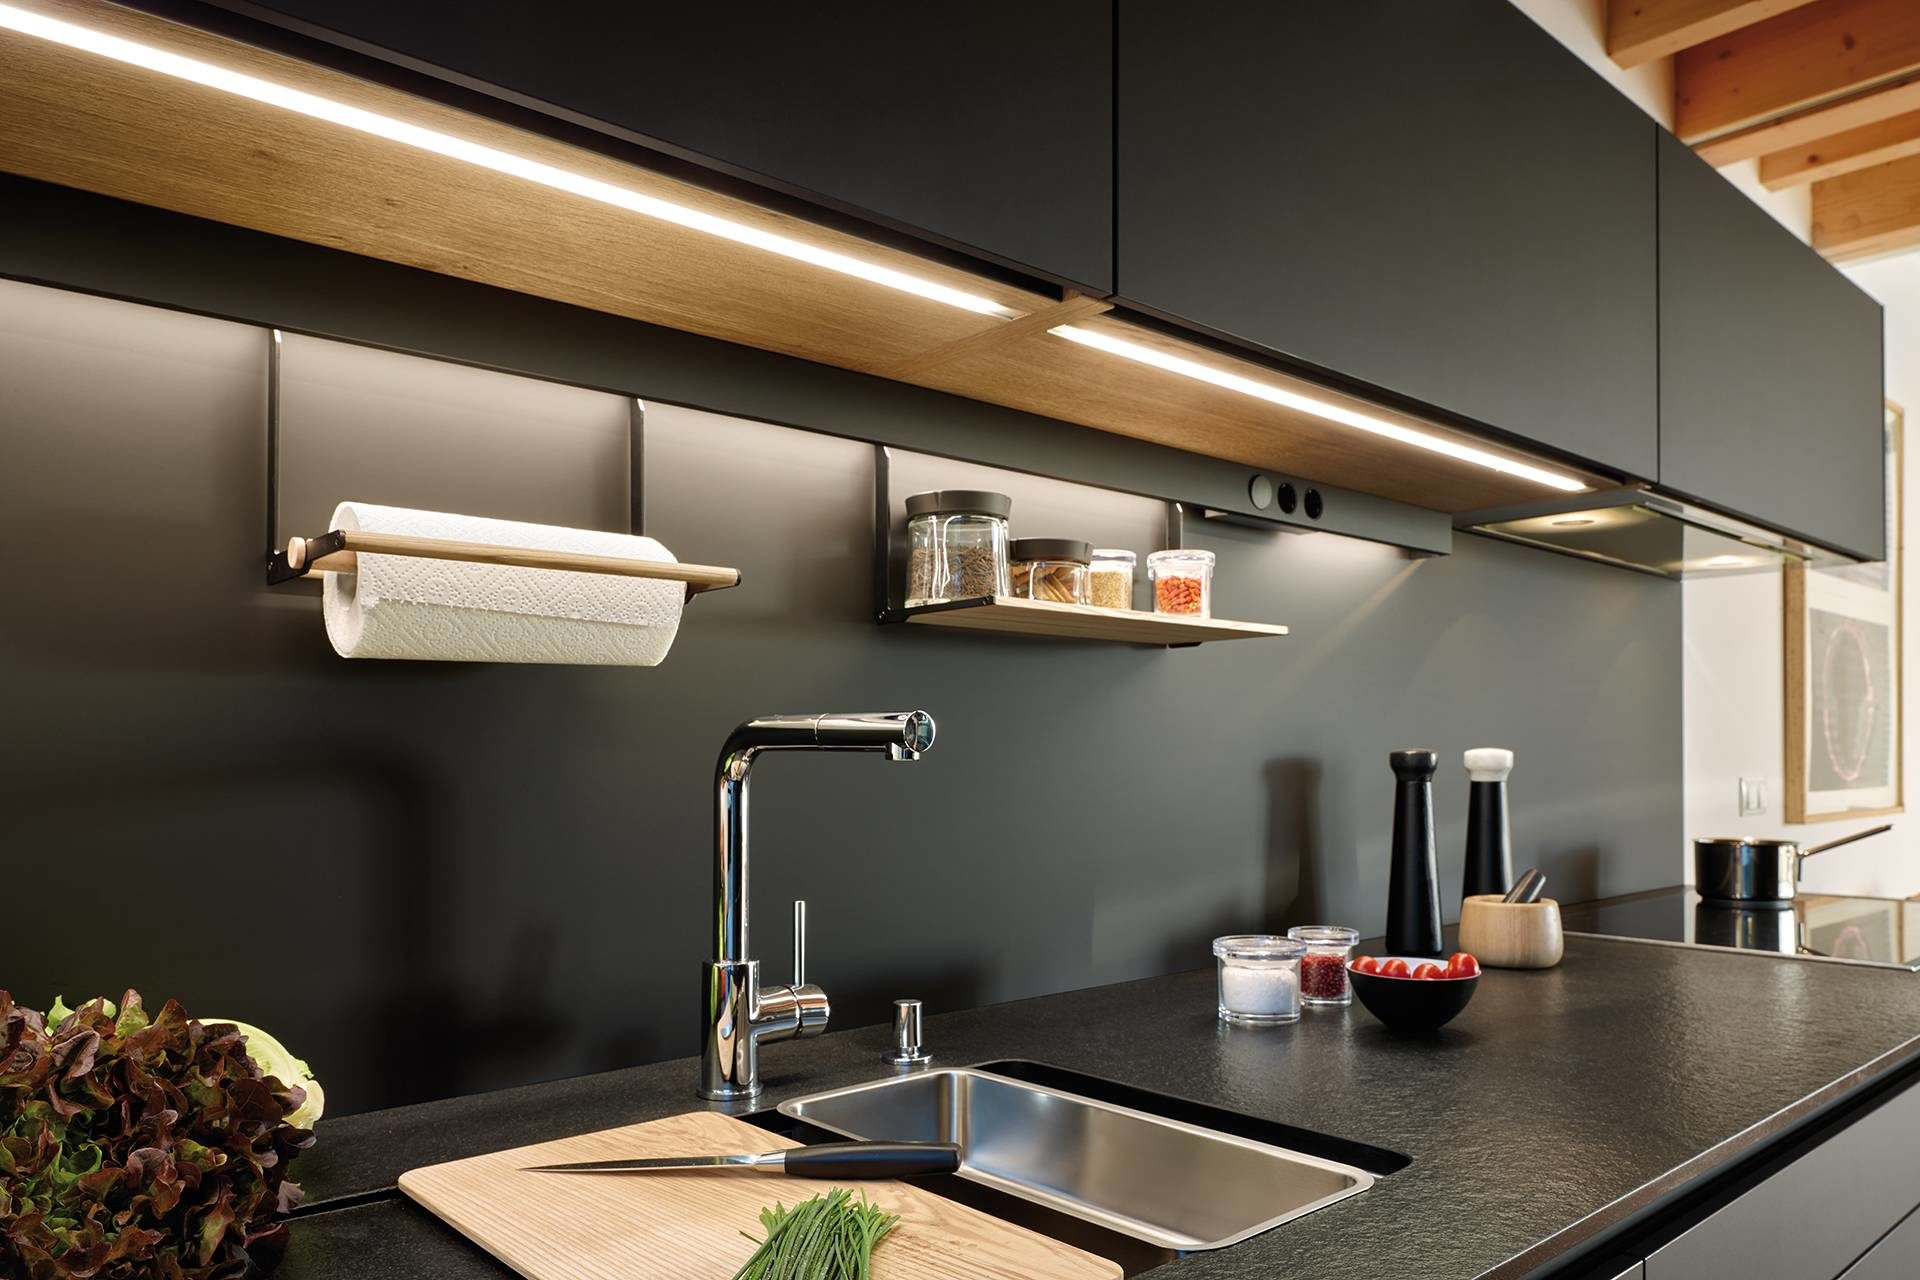 Image of LED lighting profile integrated in the lower part of a kitchen tall unit